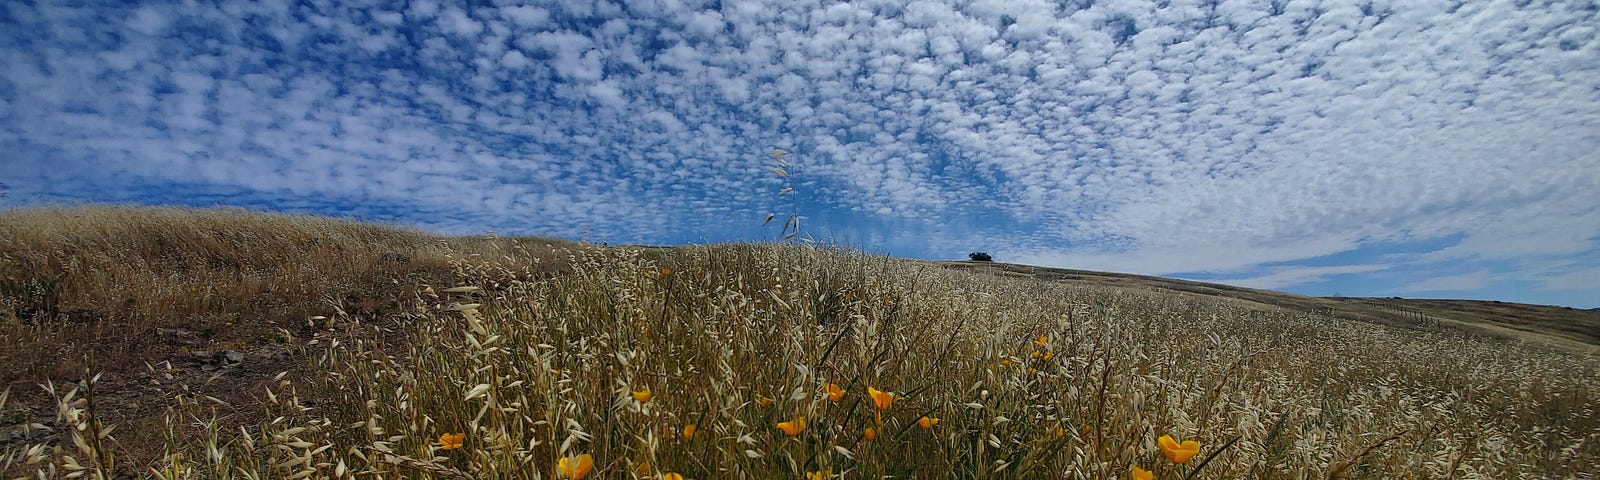 Photograph of wildflowers in California, taken in an open space preserve